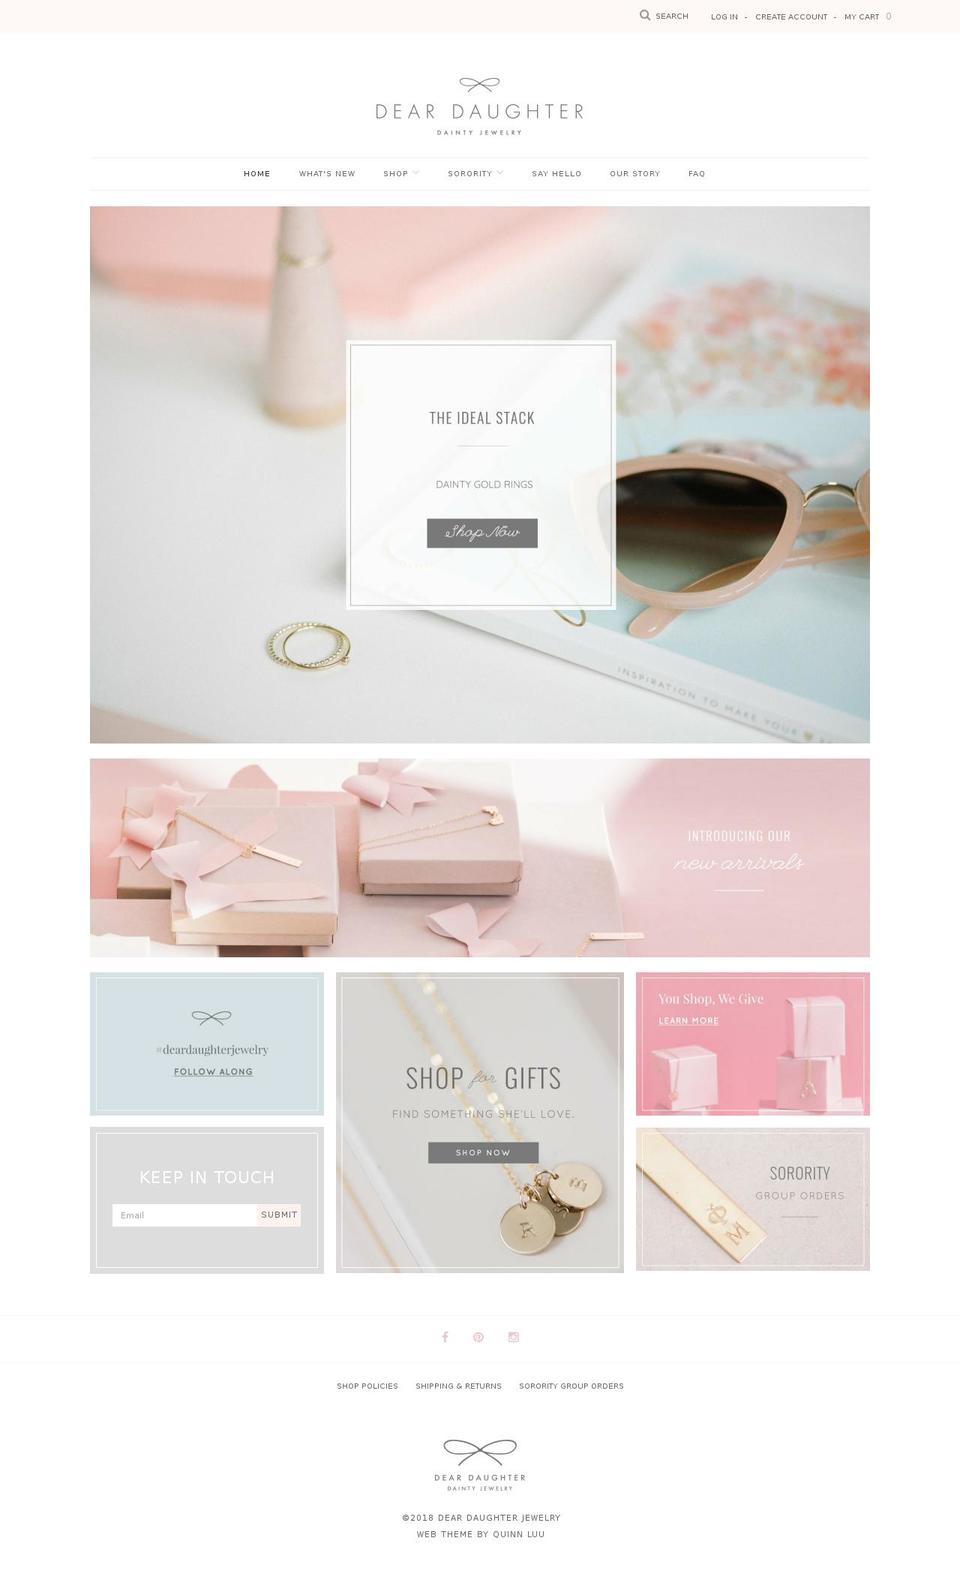 Isabelle Theme Shopify theme site example deardaughterjewelry.com